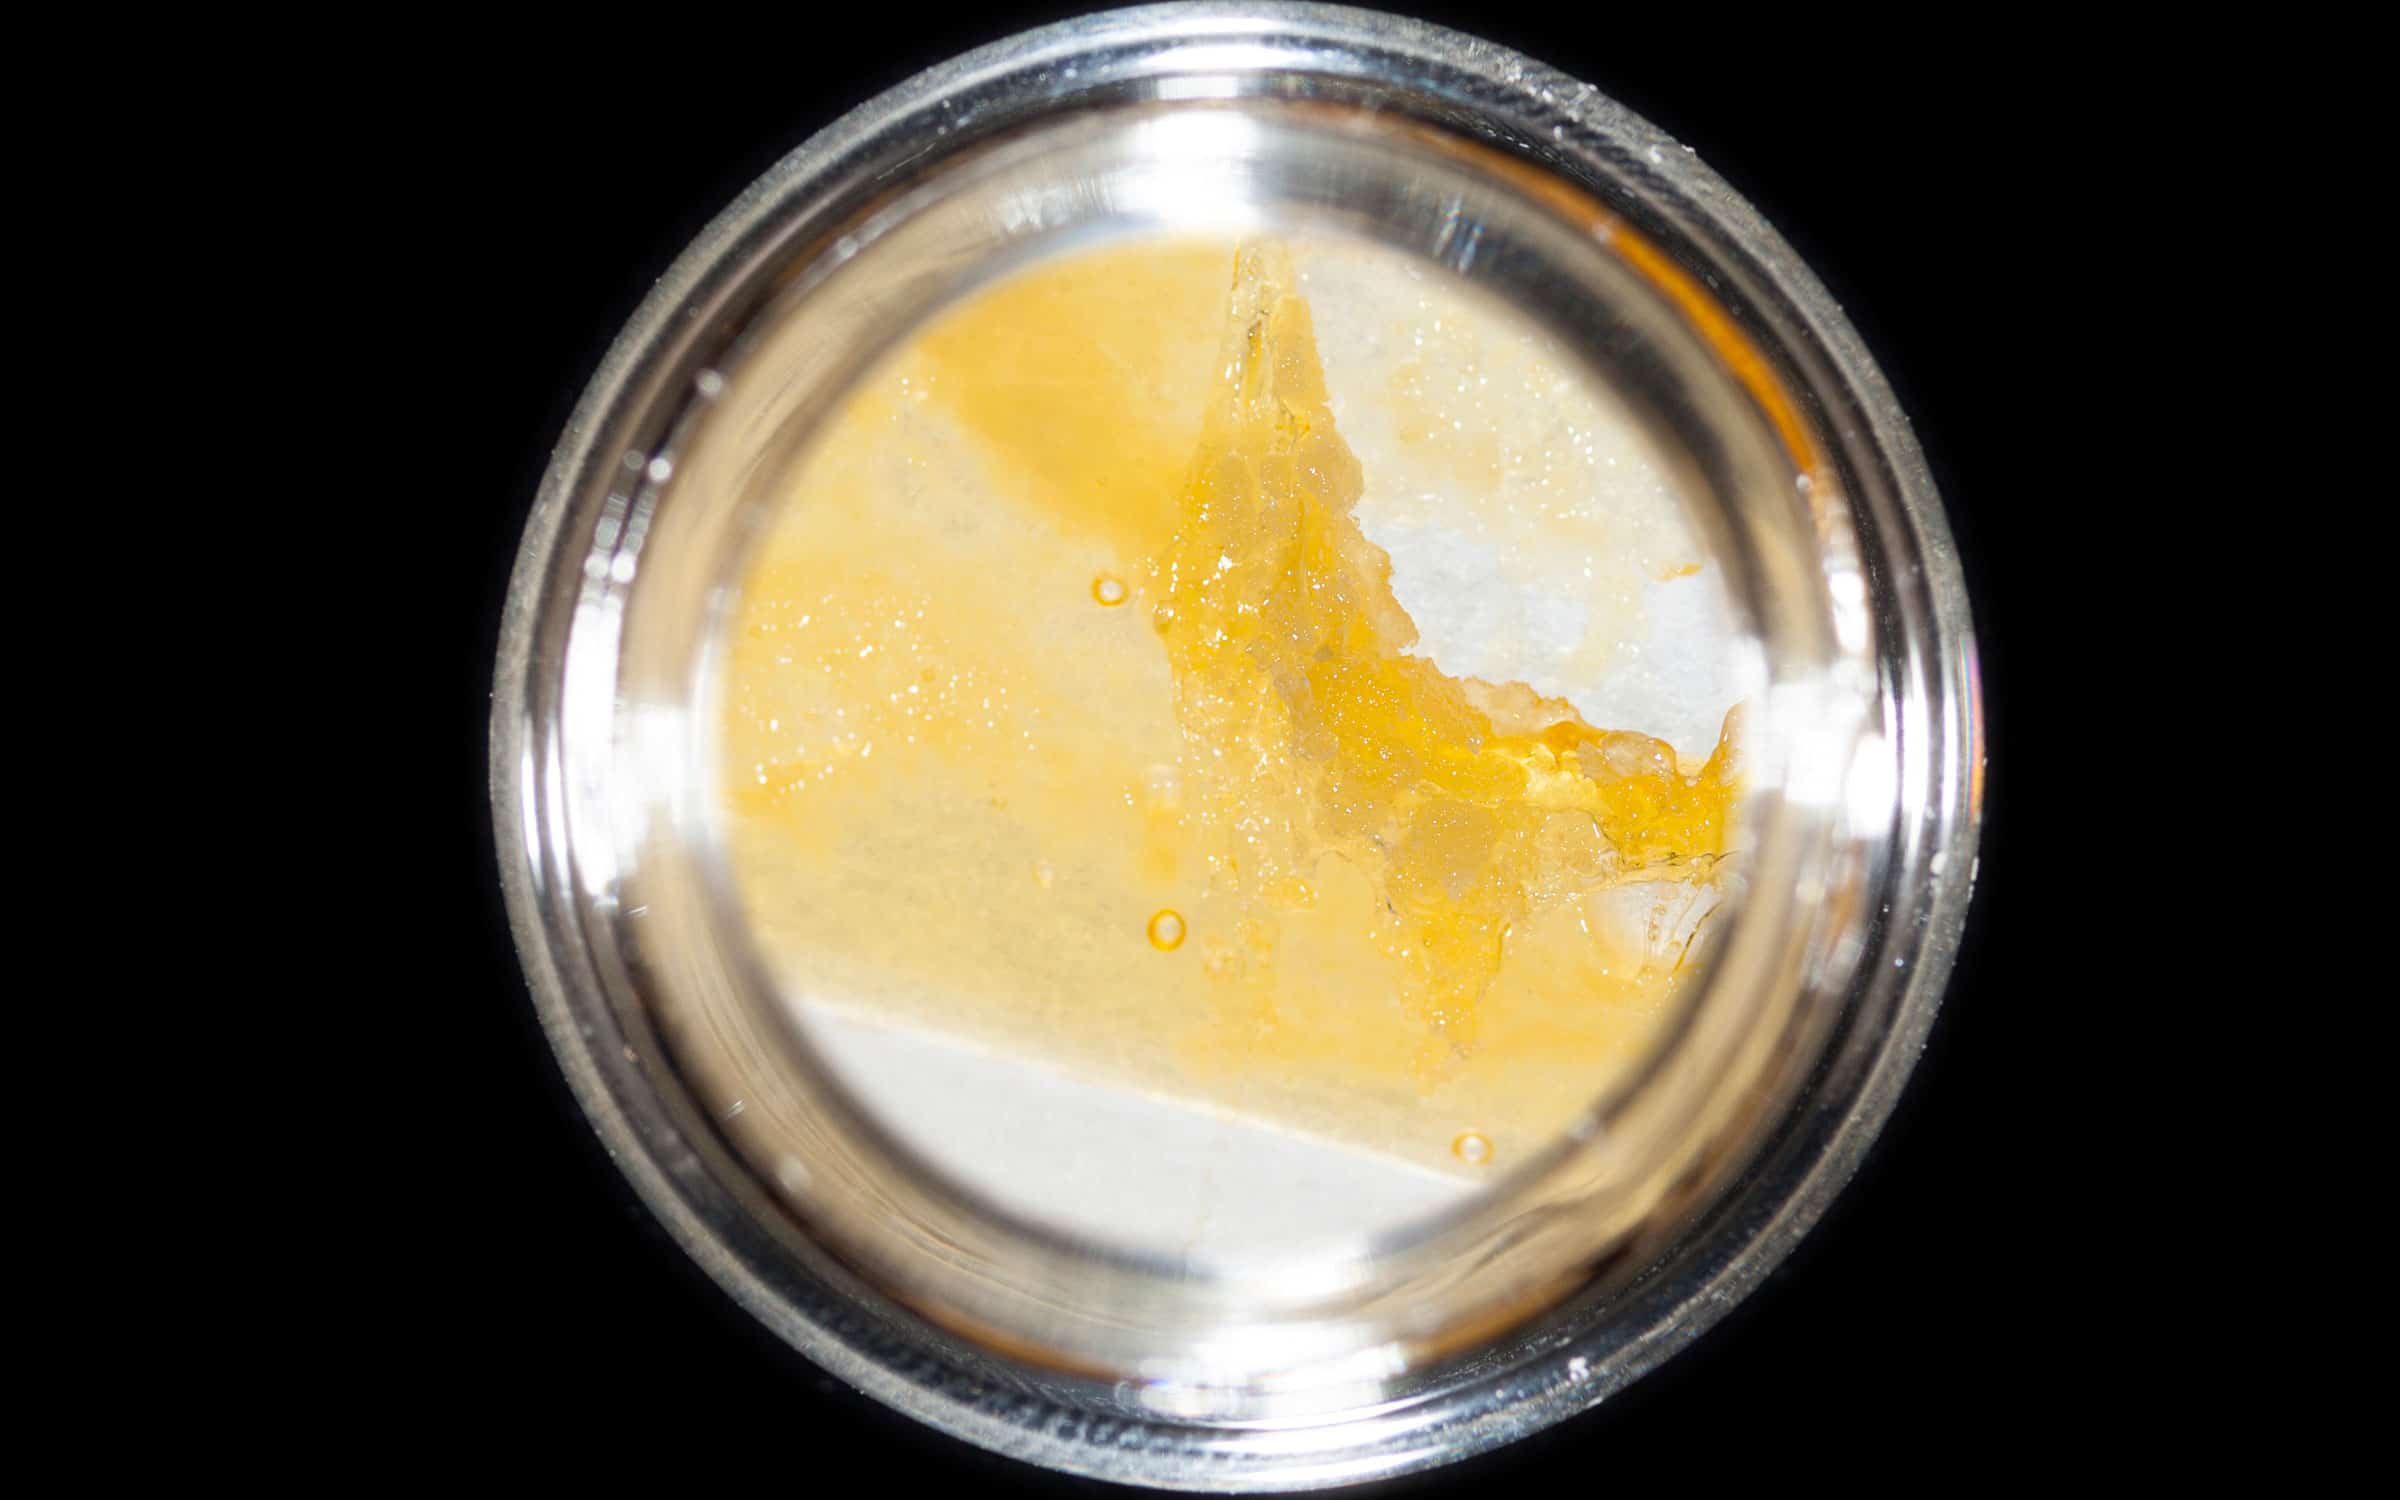 ch31_sunset_sherbert_unregistered_extracts